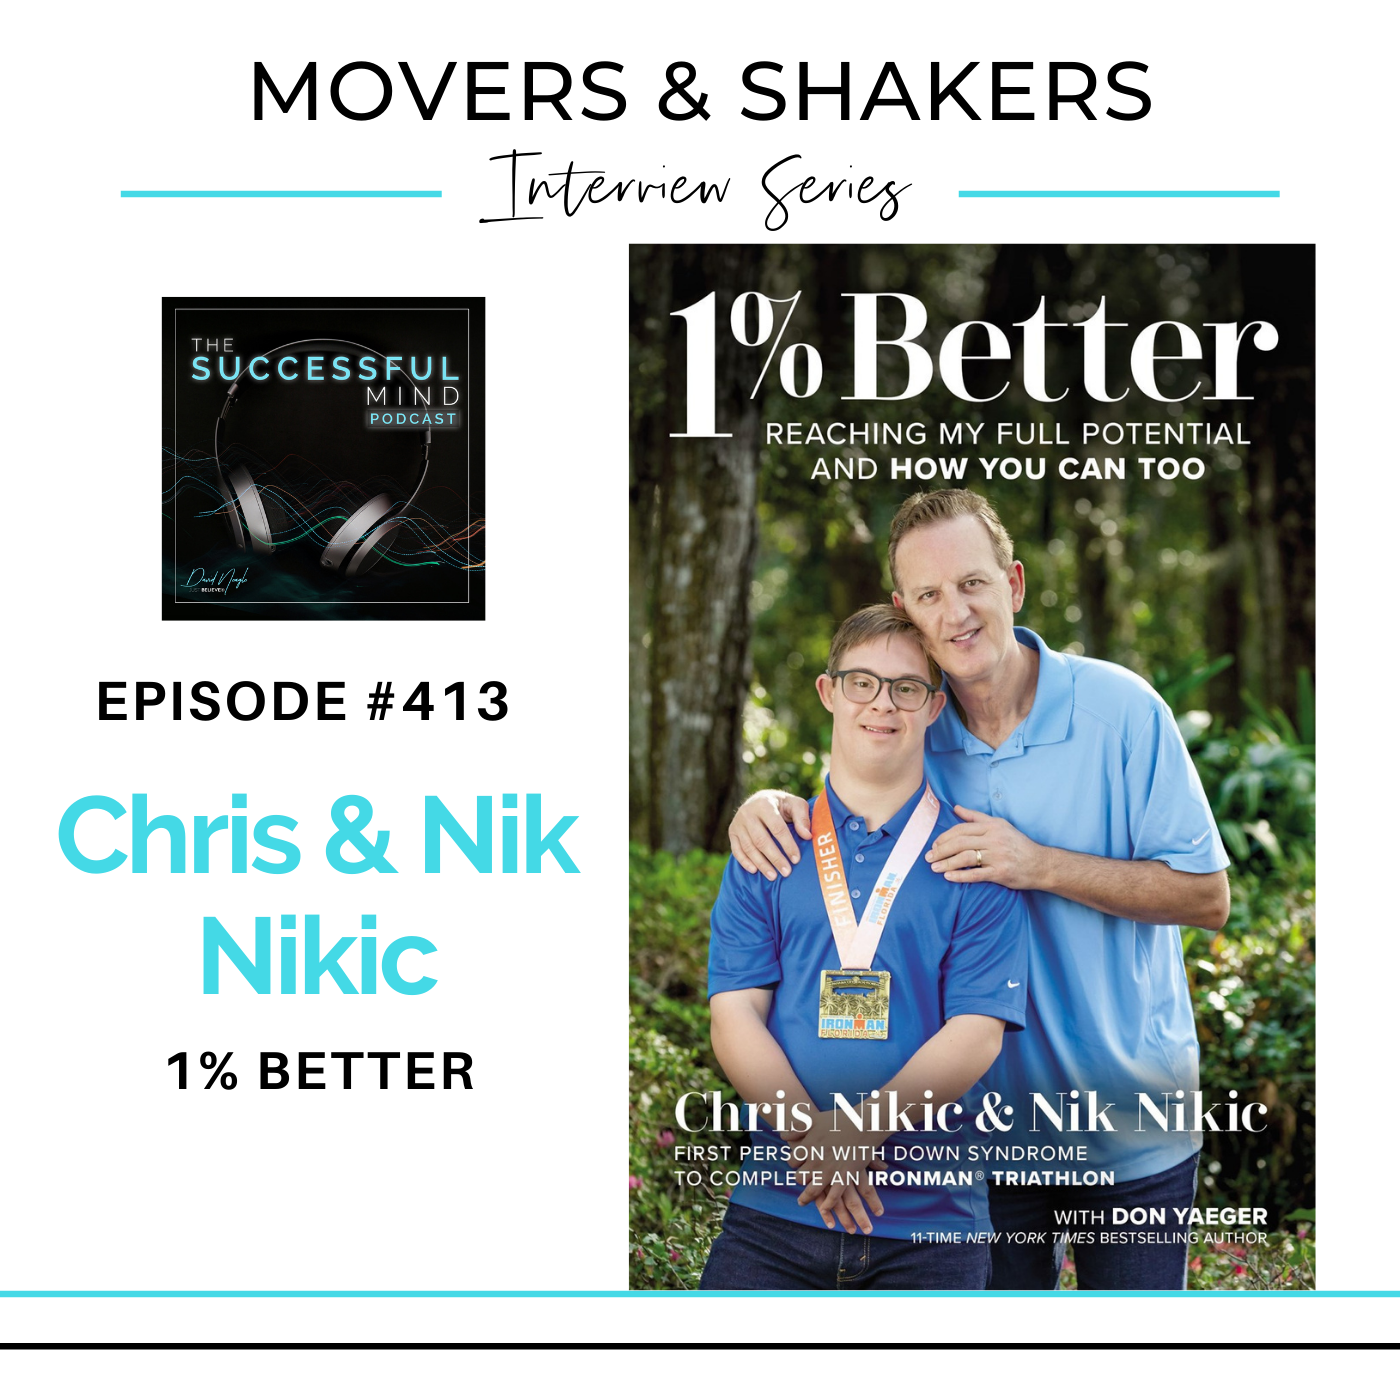 The Successful Mind Podcast – Episode 413 – Movers & Shakers – Chris & Nik Nikic